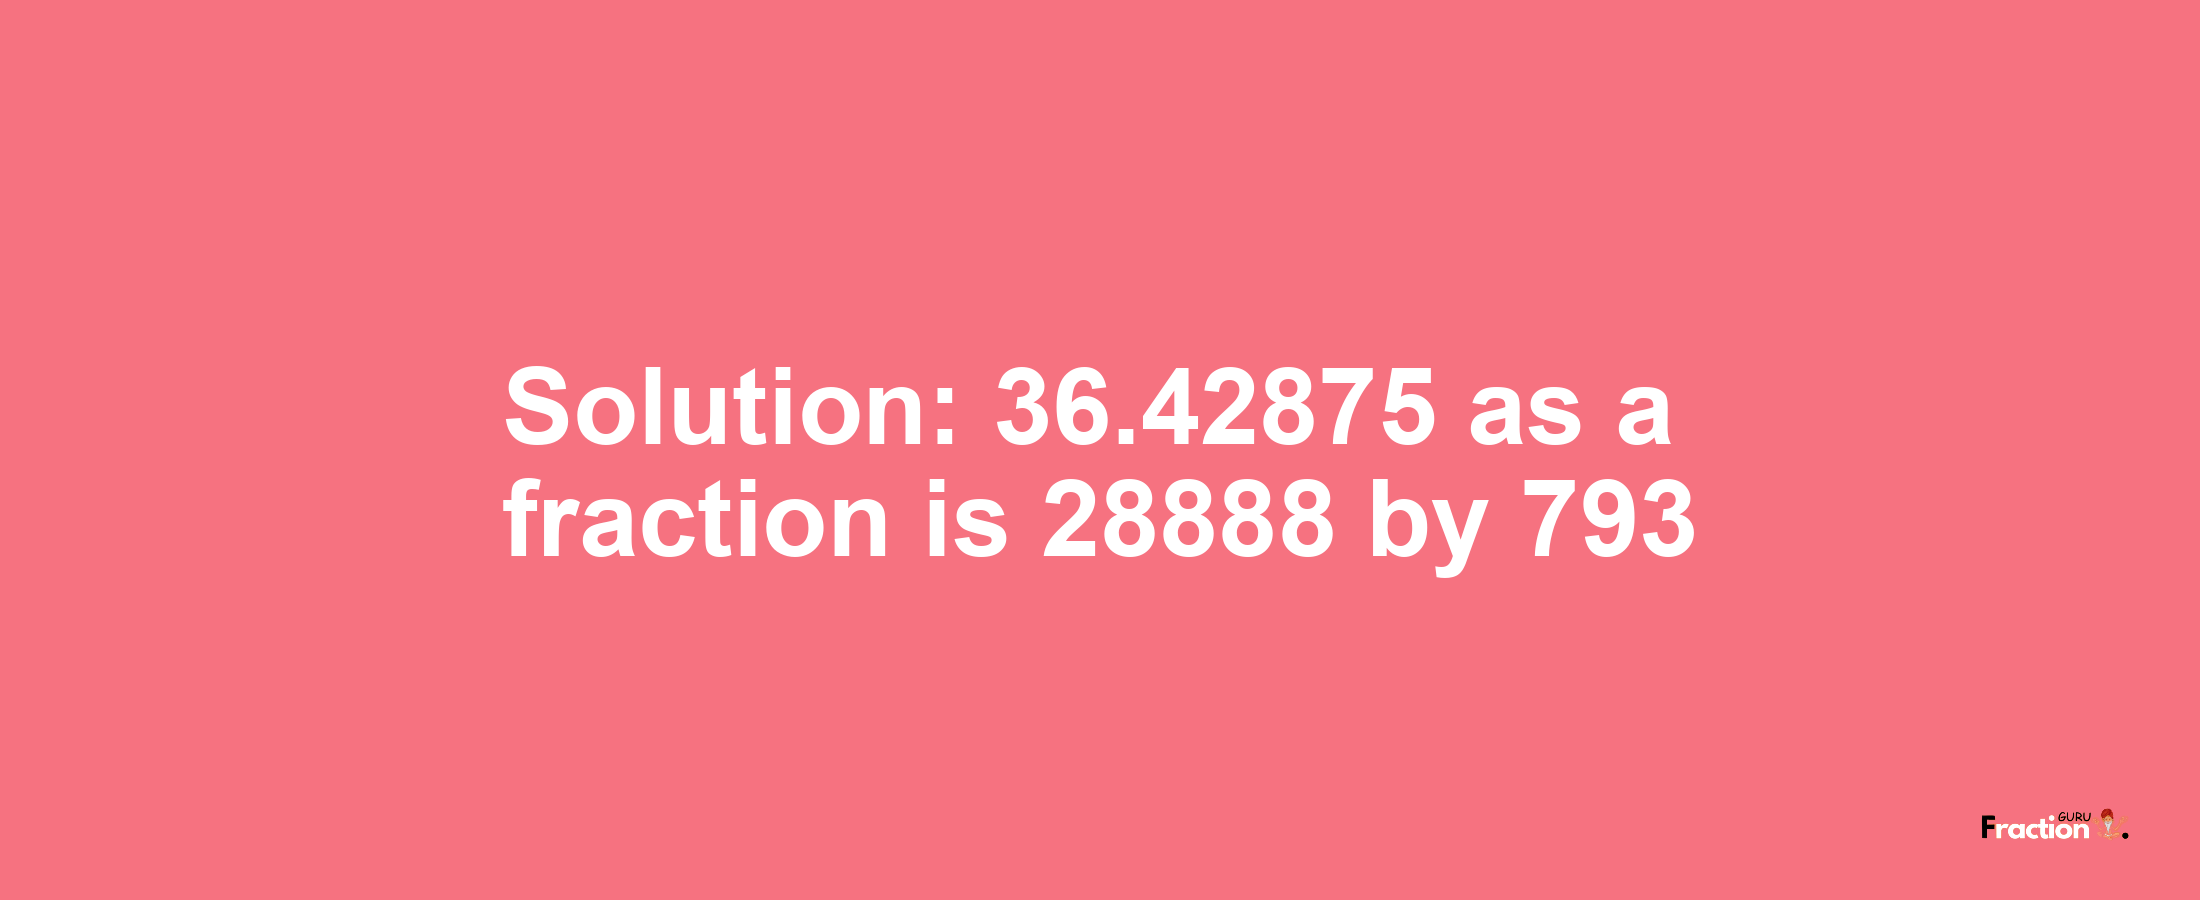 Solution:36.42875 as a fraction is 28888/793